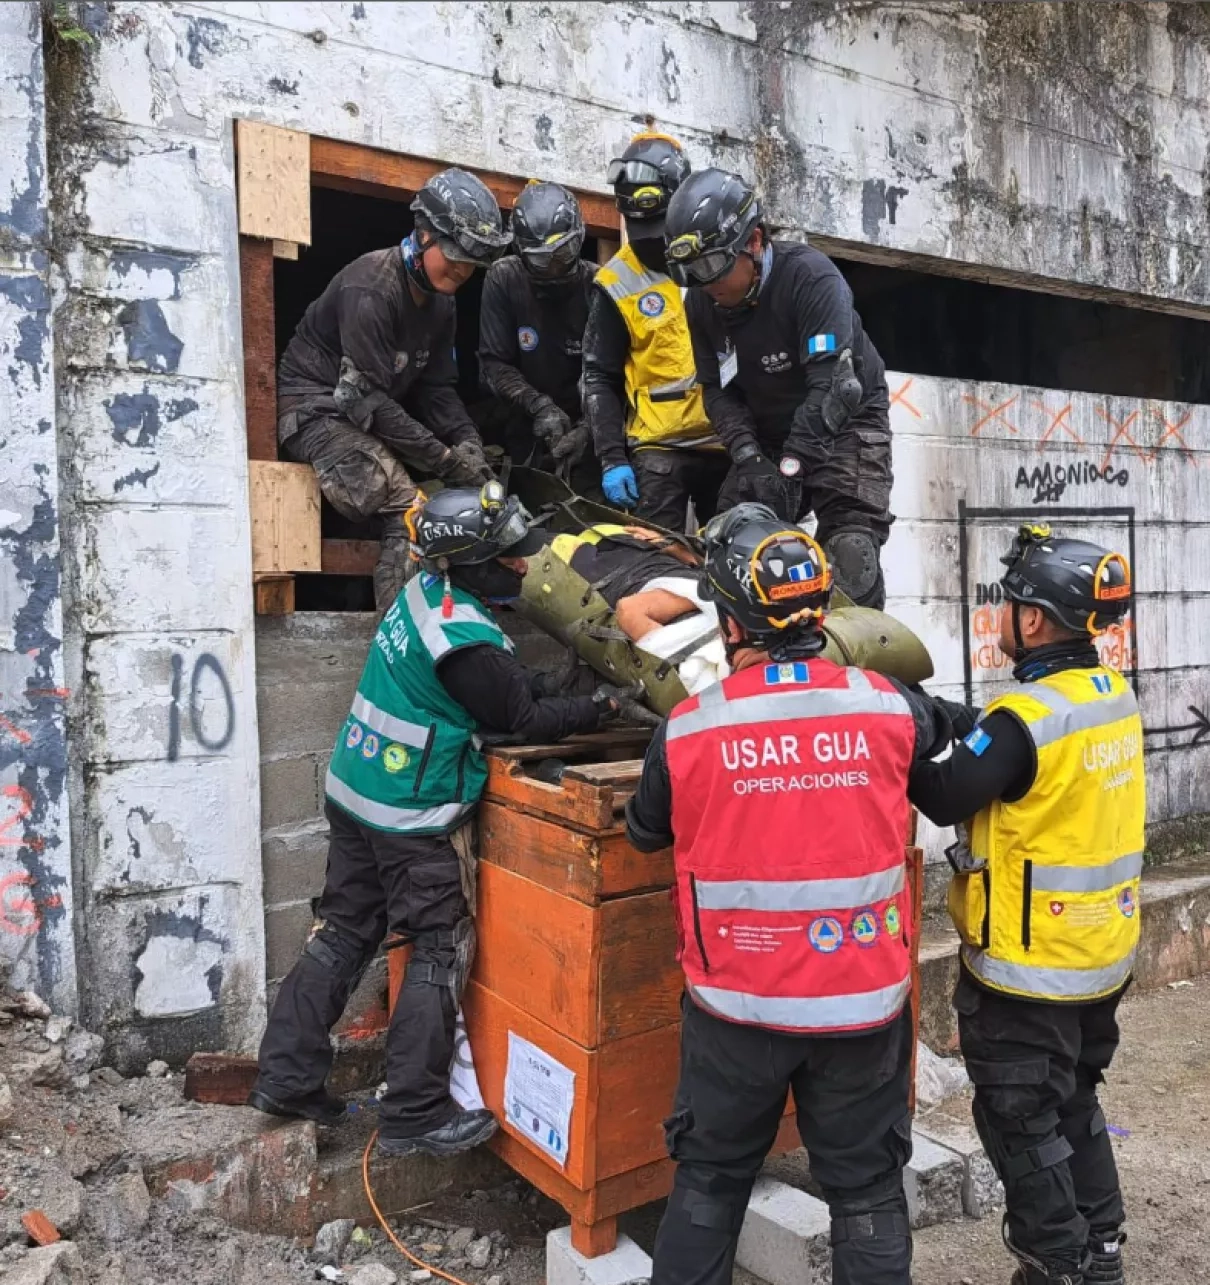 An urban search and rescue (USAR) team from the National Coordination for Disaster Reduction Guatemala (CONRED) simulates rescuing a trapped individual from a collapsed structure during the 3rd Regional Simulation of Disaster Response and Humanitarian Assistance. Credits: CEPREDENAC